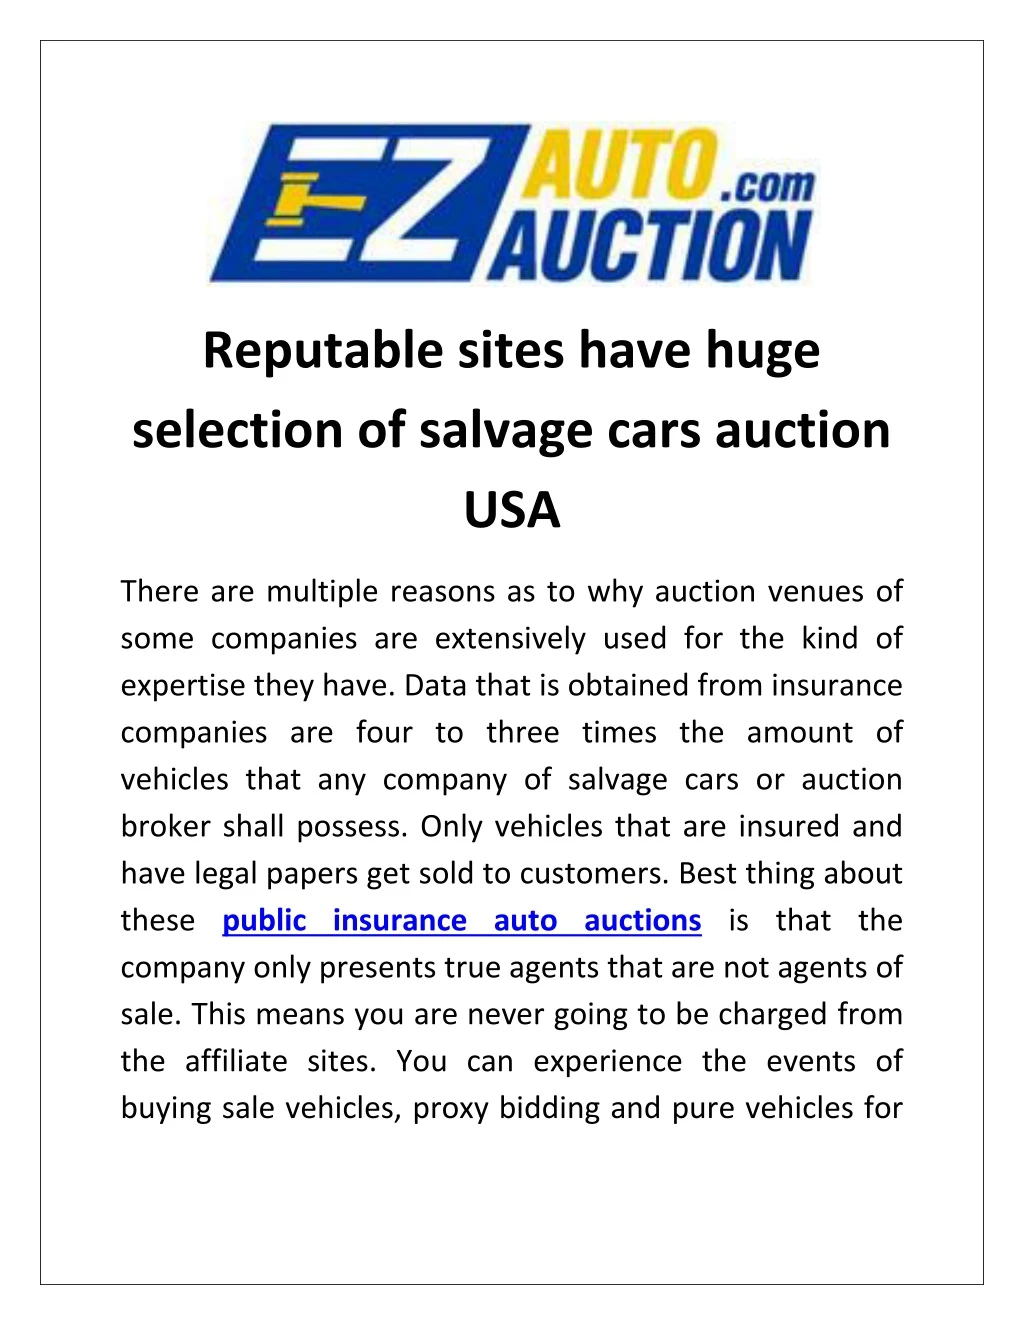 reputable sites have huge selection of salvage